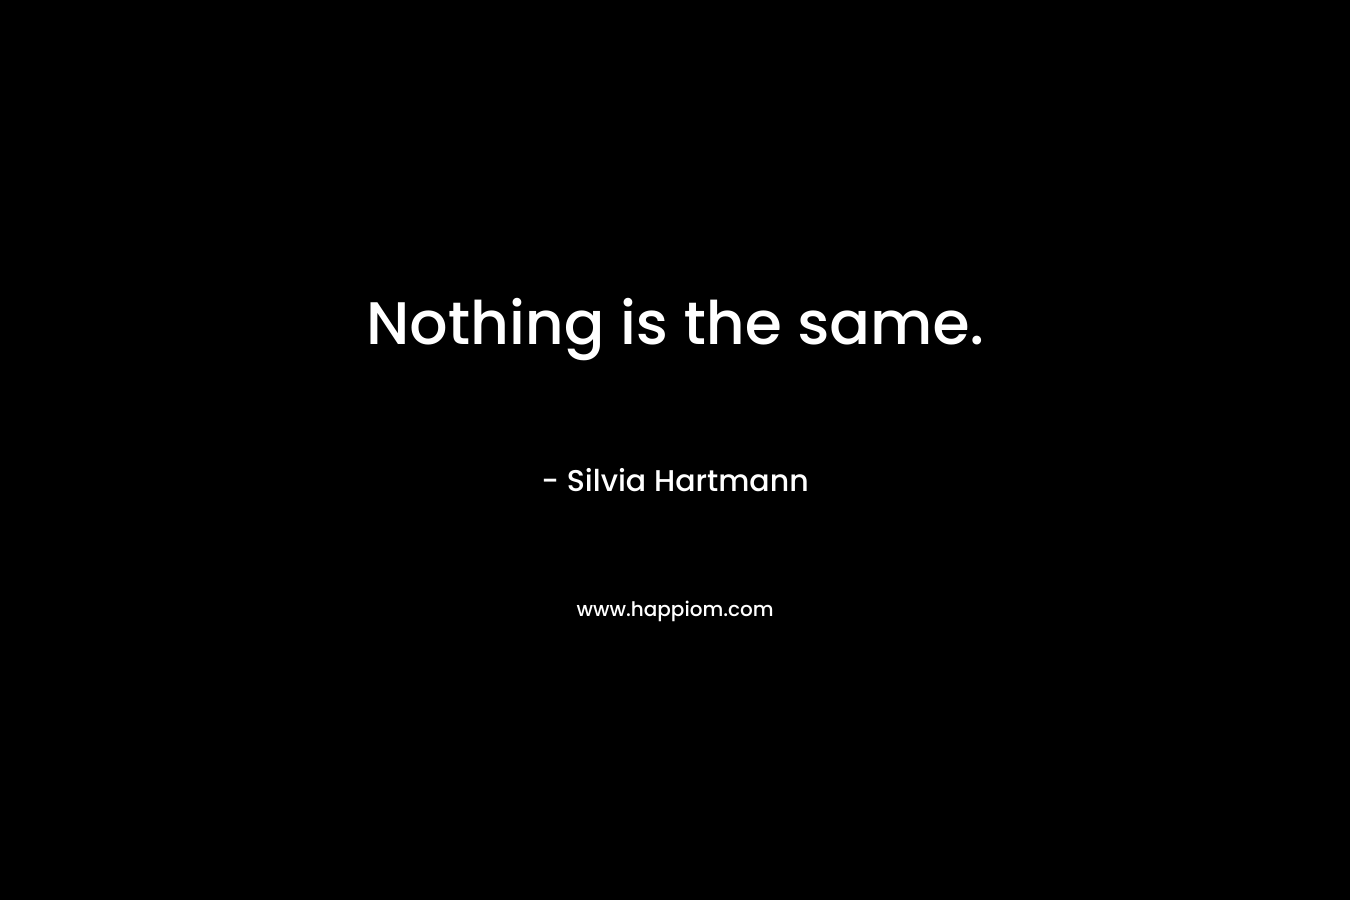 Nothing is the same. – Silvia Hartmann